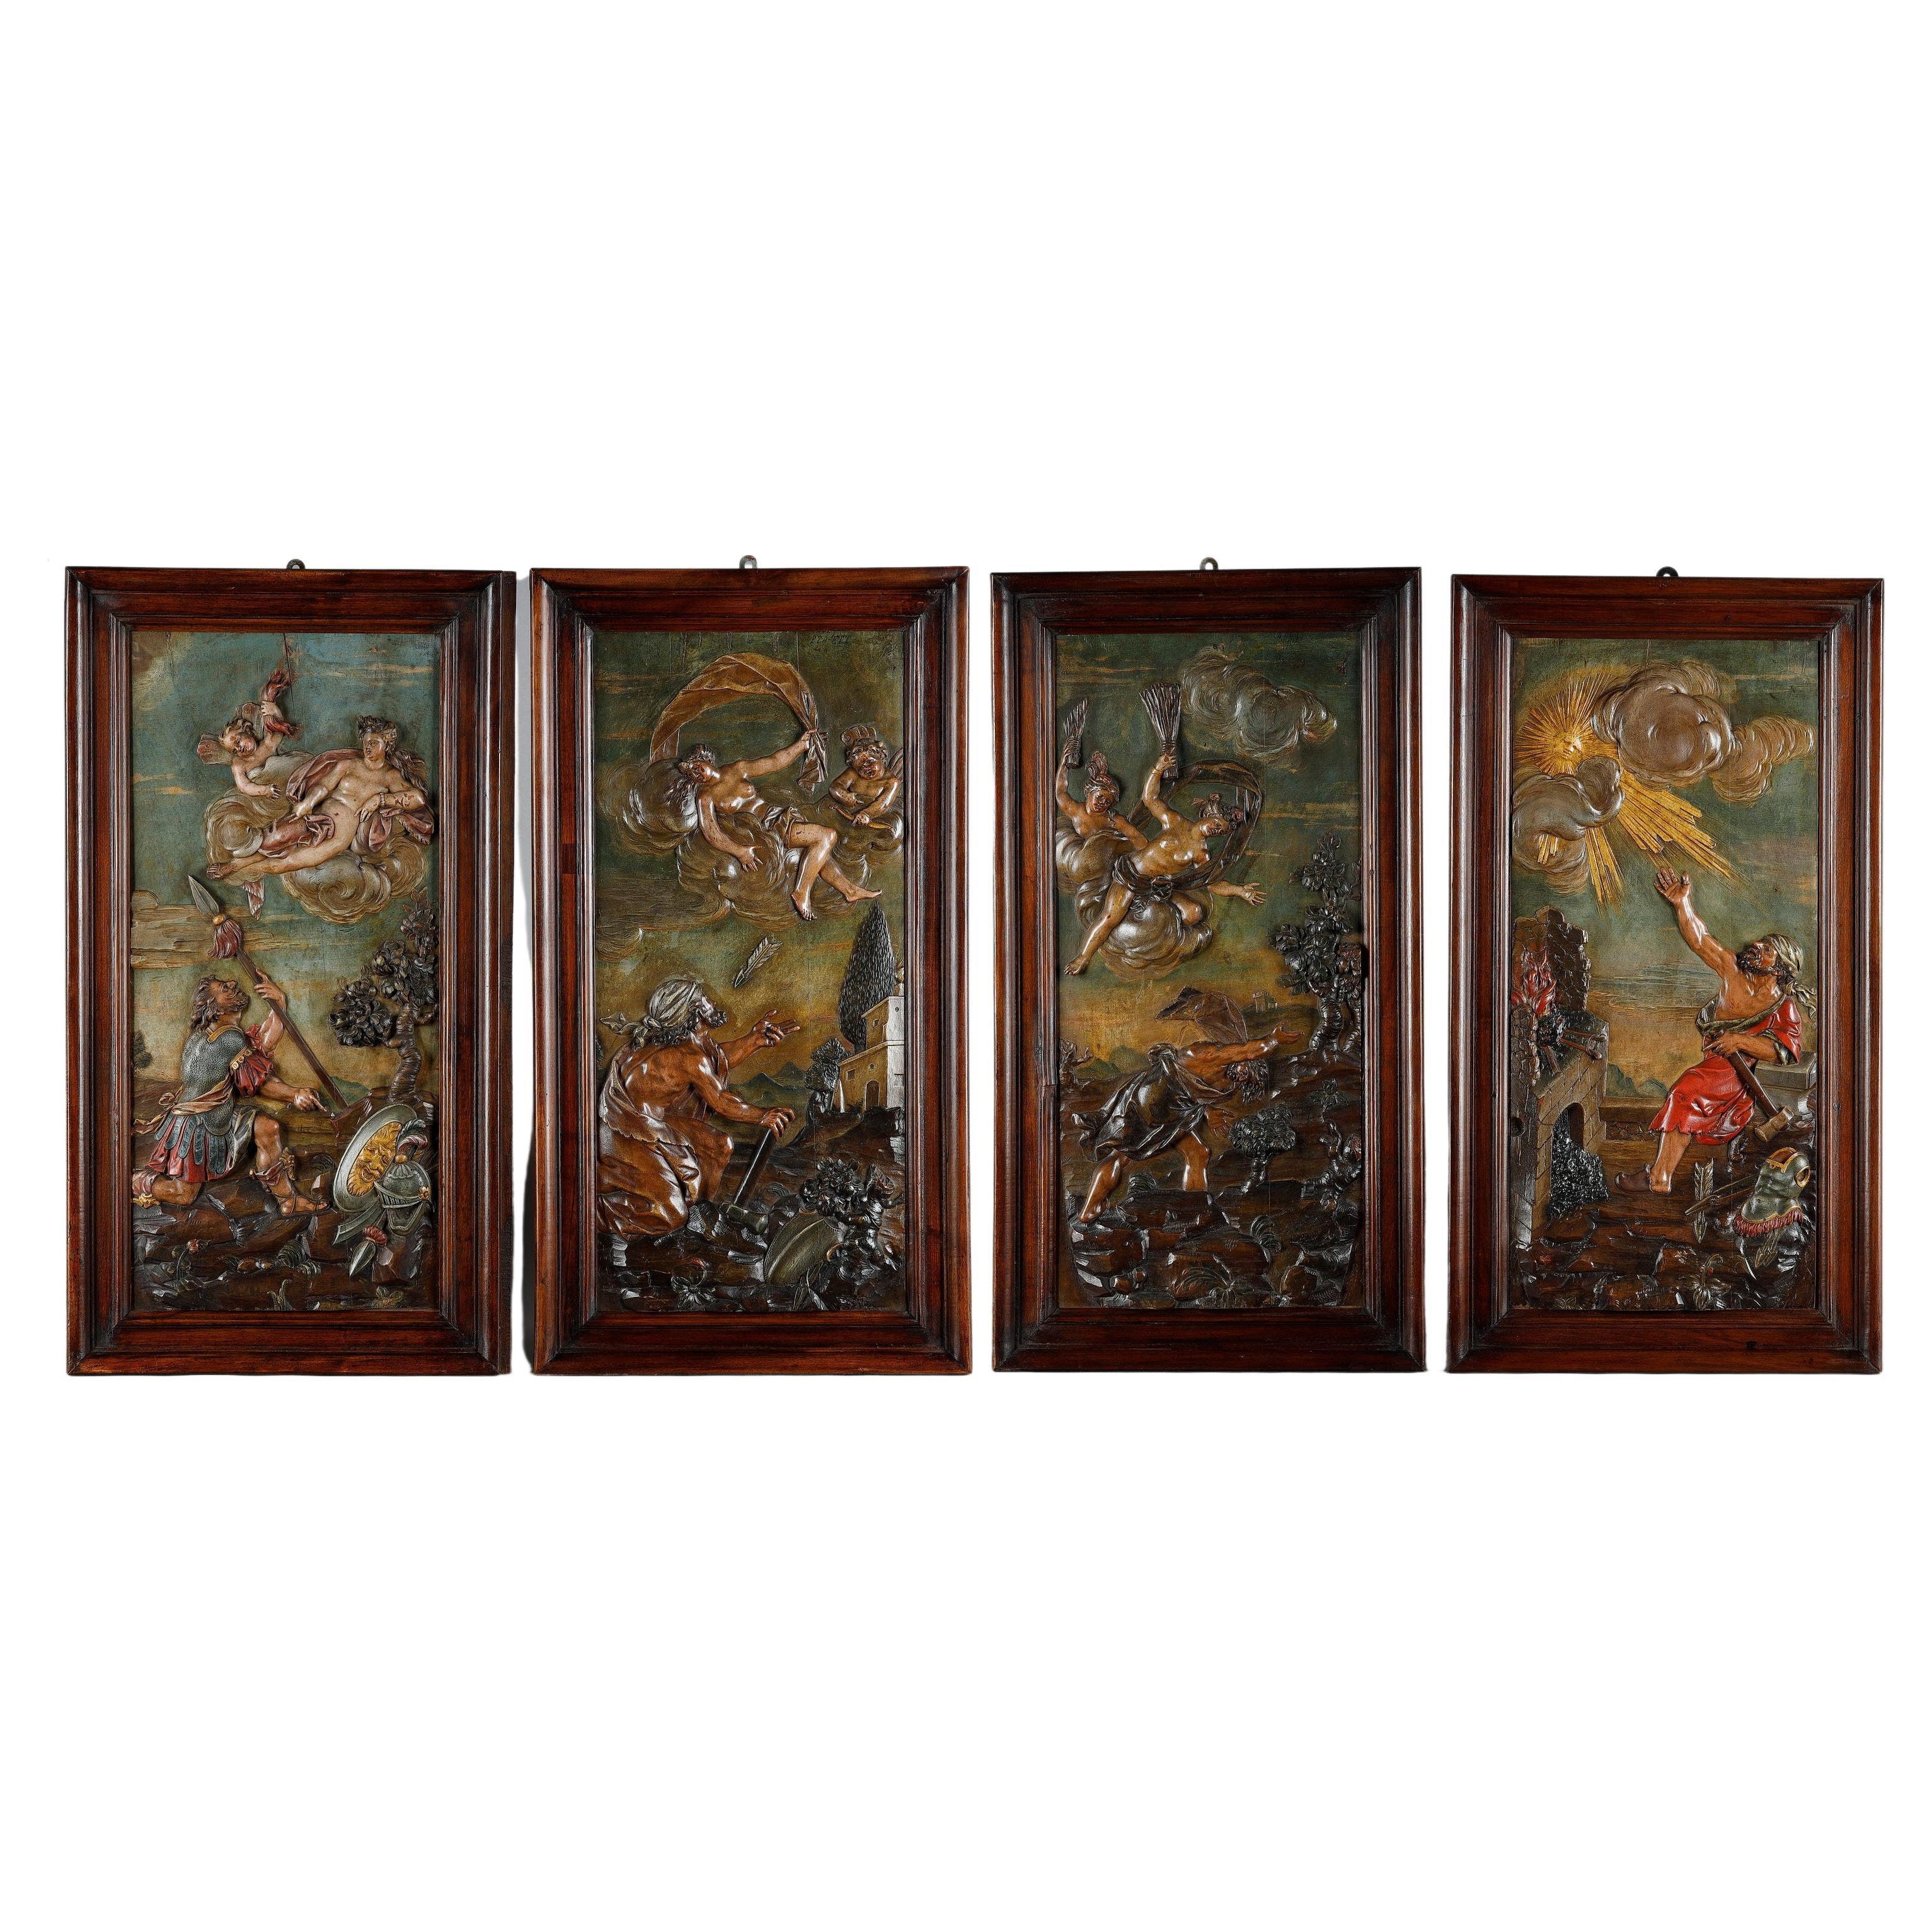 Suite of four carved basswood panels from the 18th century